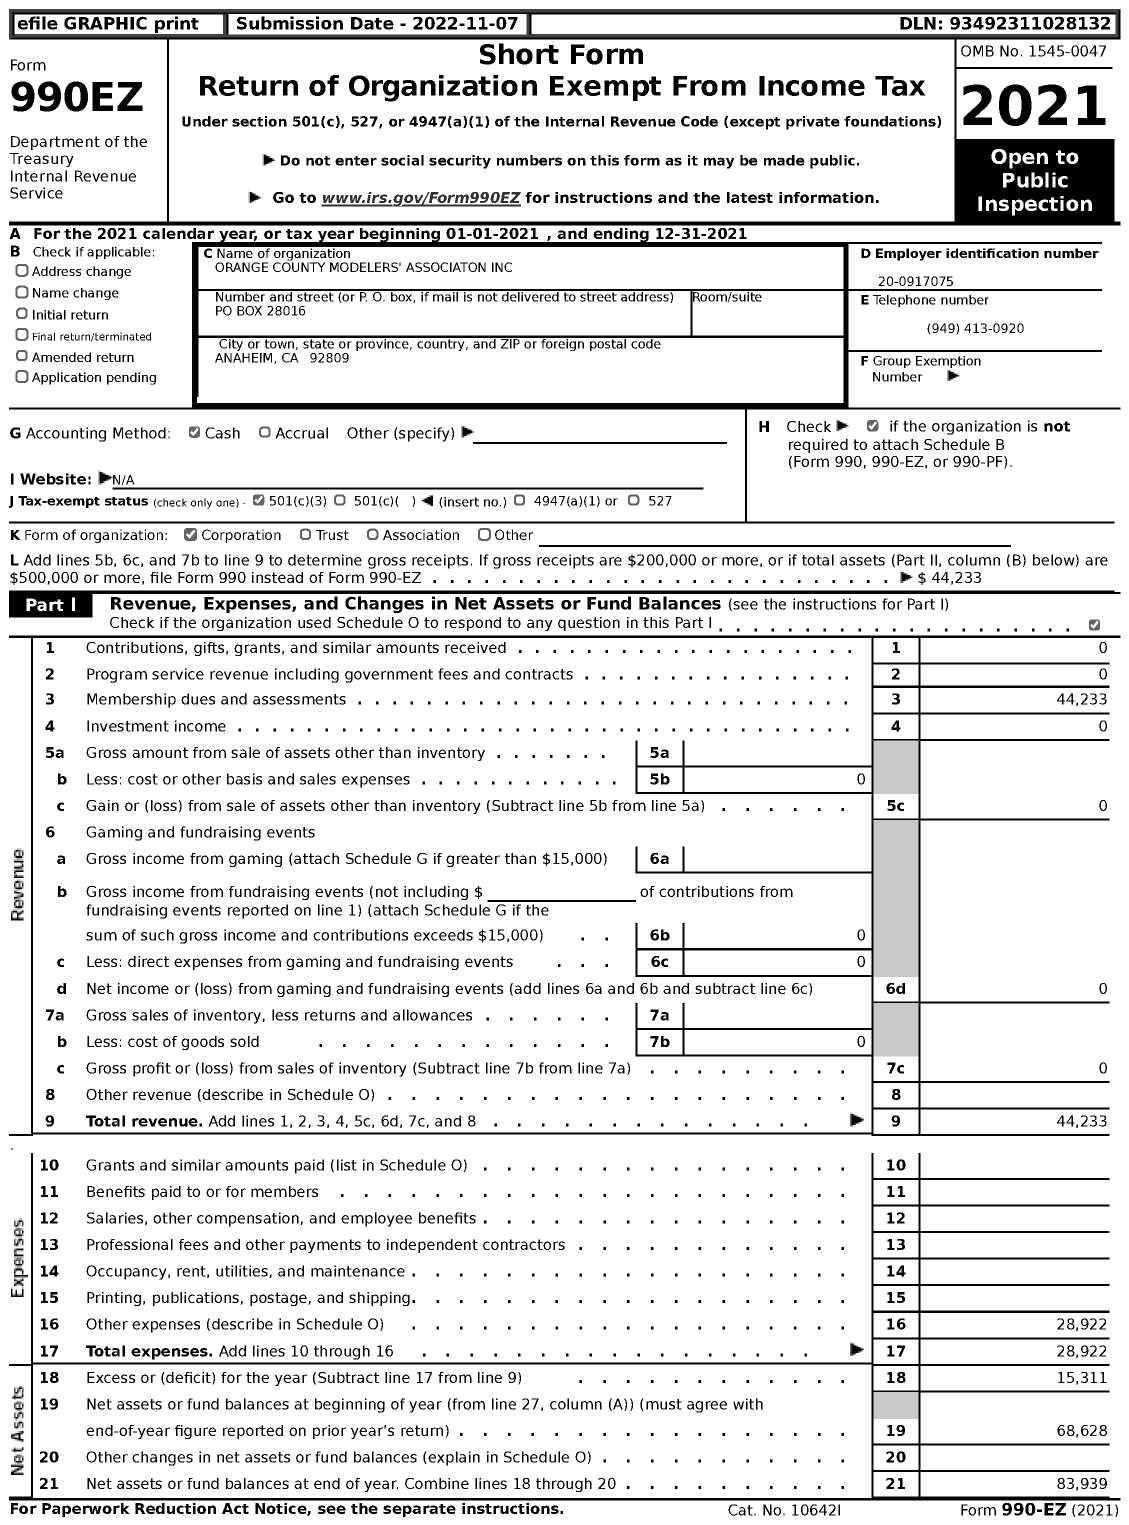 Image of first page of 2021 Form 990EZ for Orange County Modelers' Associaton